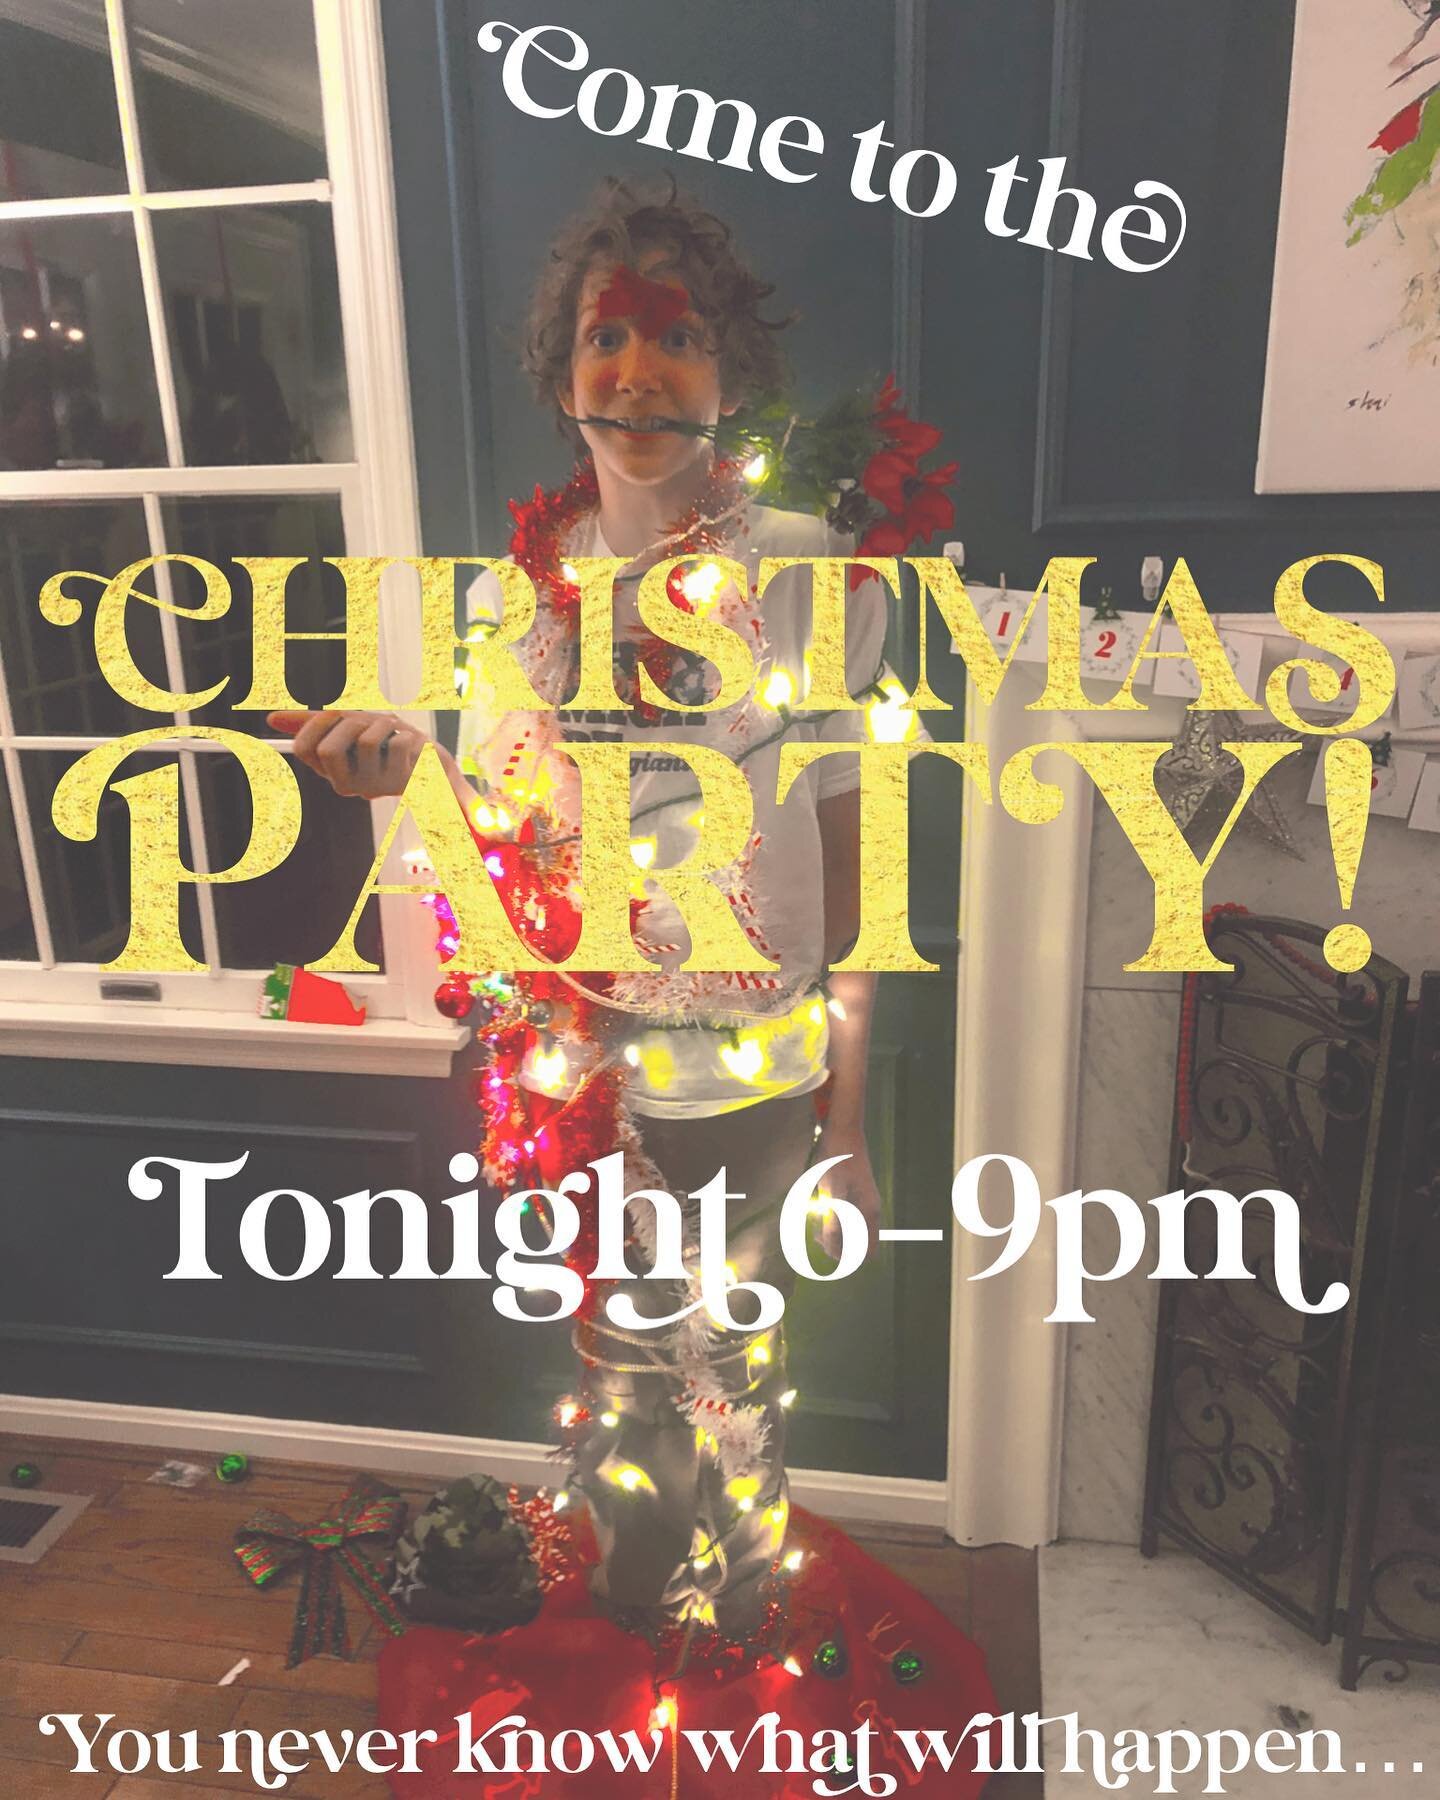 It&rsquo;s goin down tonight! #christmasparty #bringyoursocks